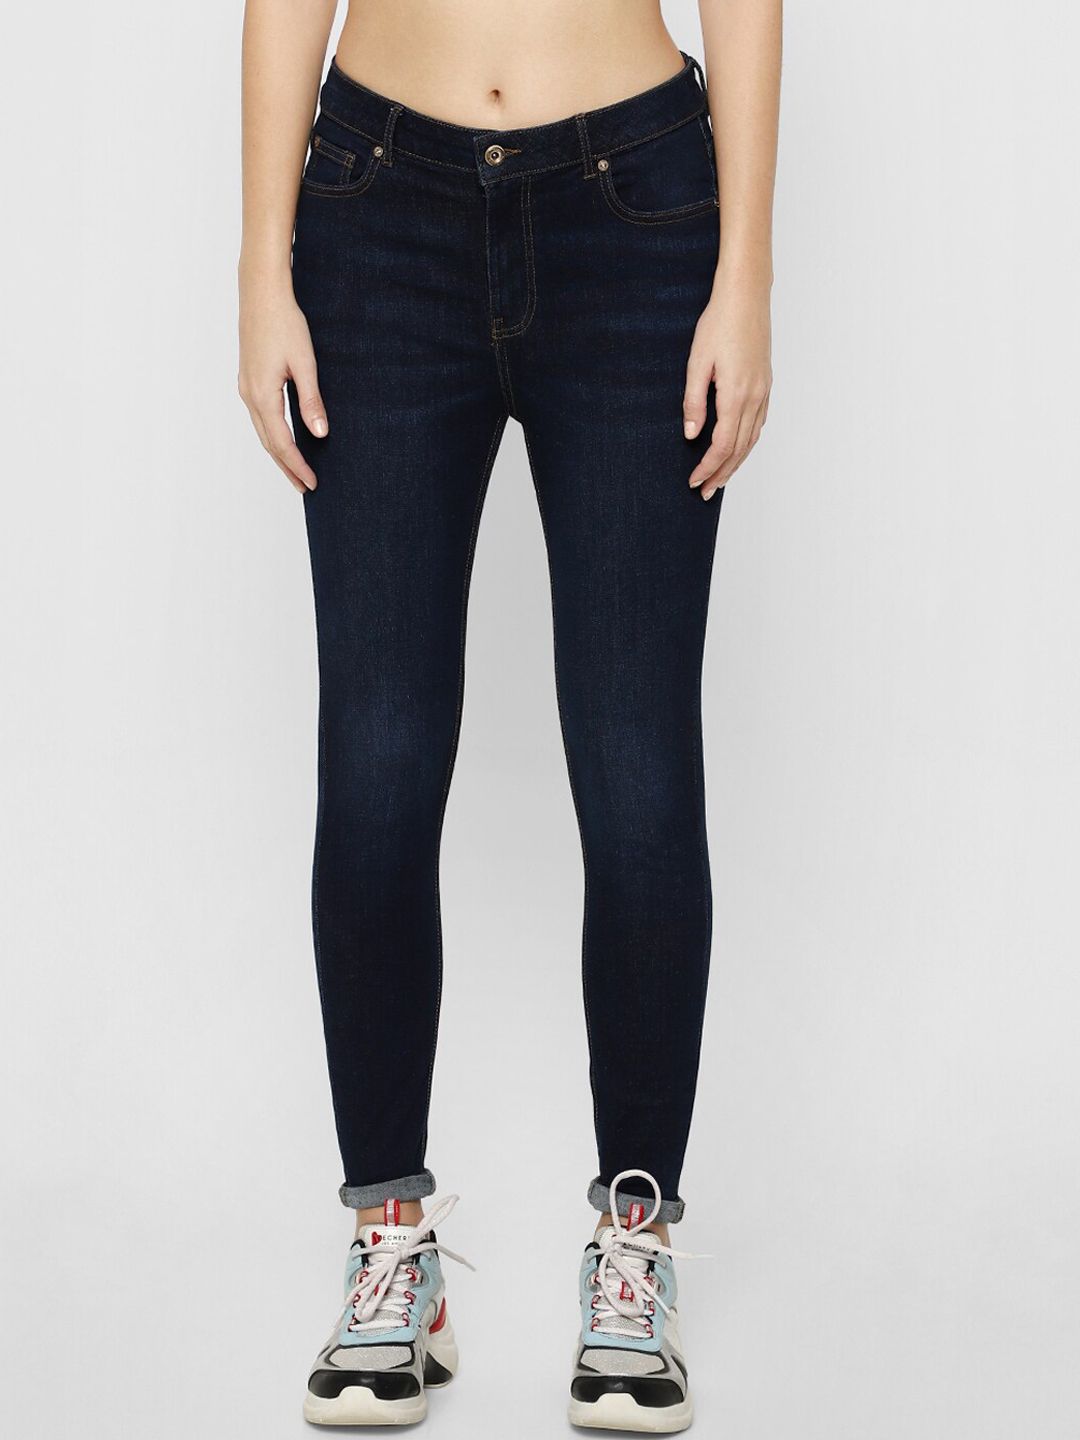 ONLY Women Navy Blue Skinny Fit High-Rise Light Fade Cotton Jeans Price in India